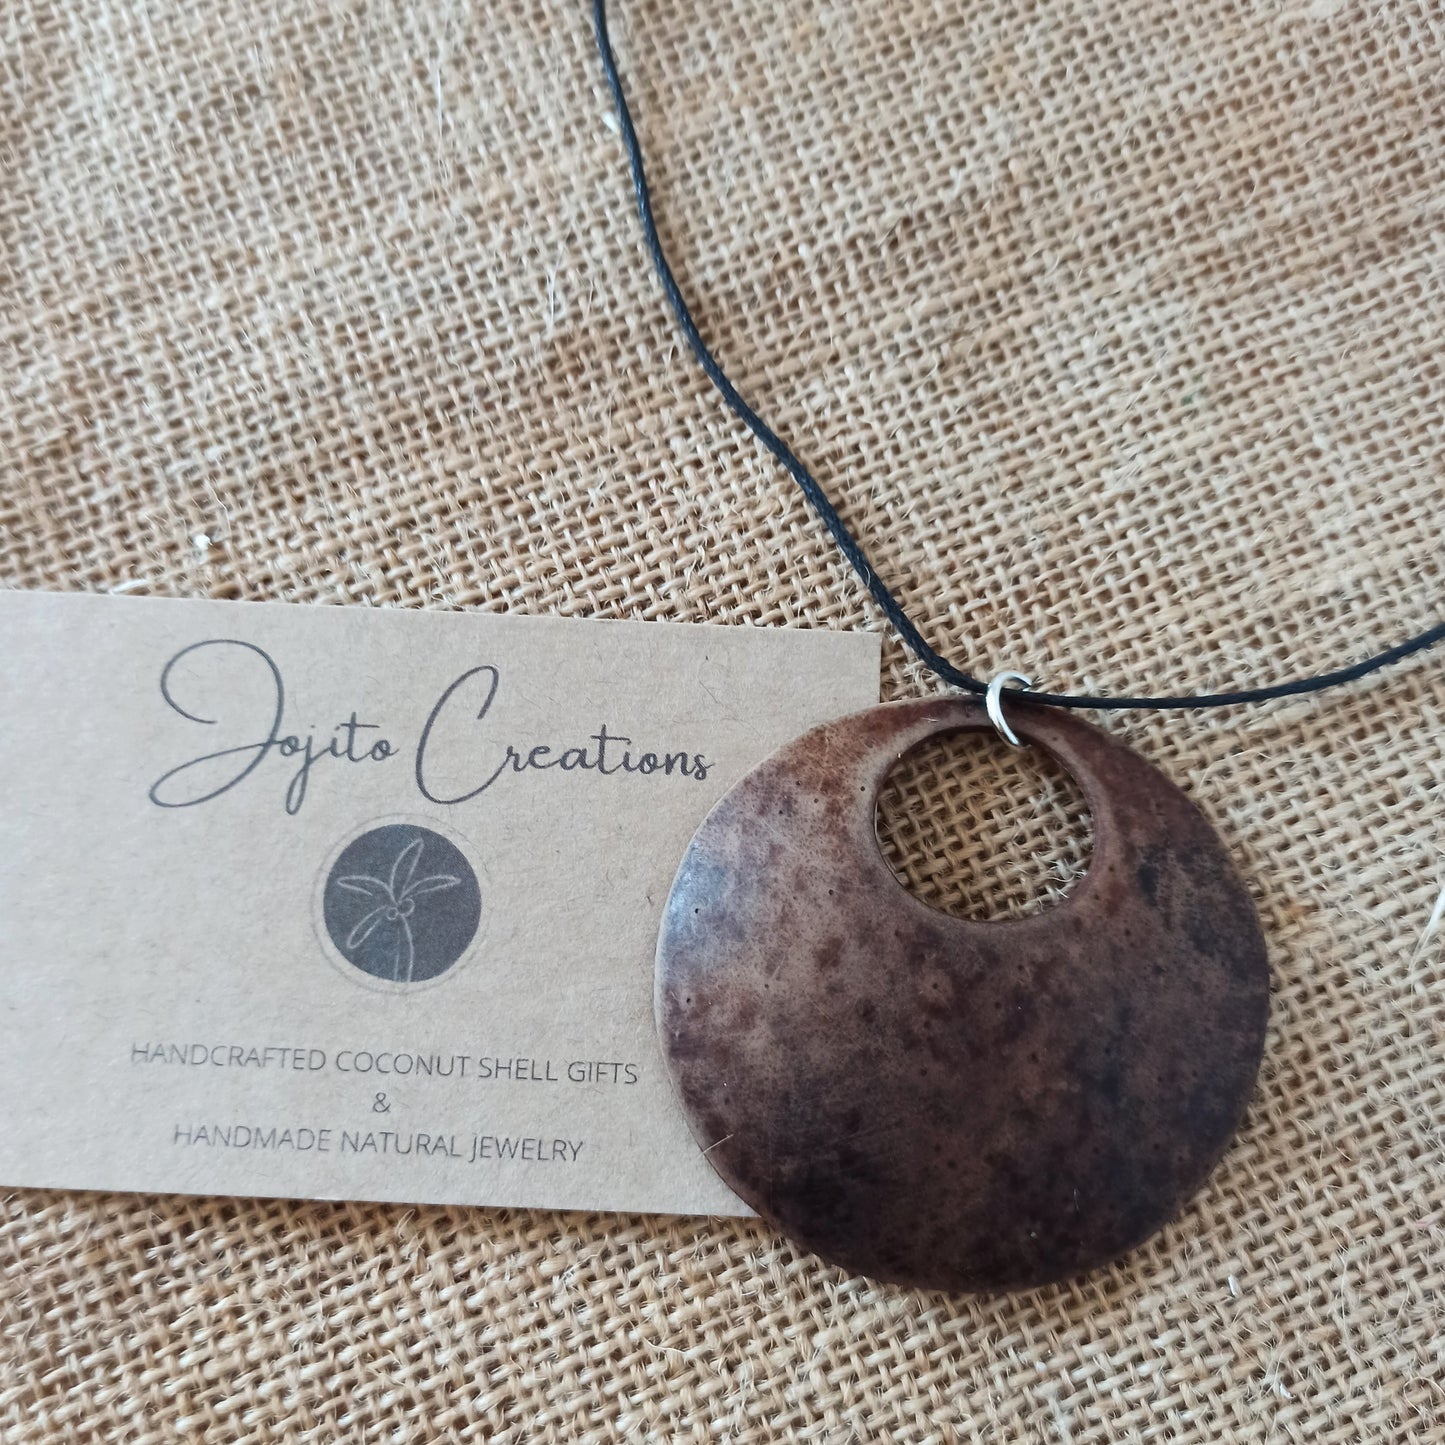 Gourd Natural Pendant Necklace Jojito Creations